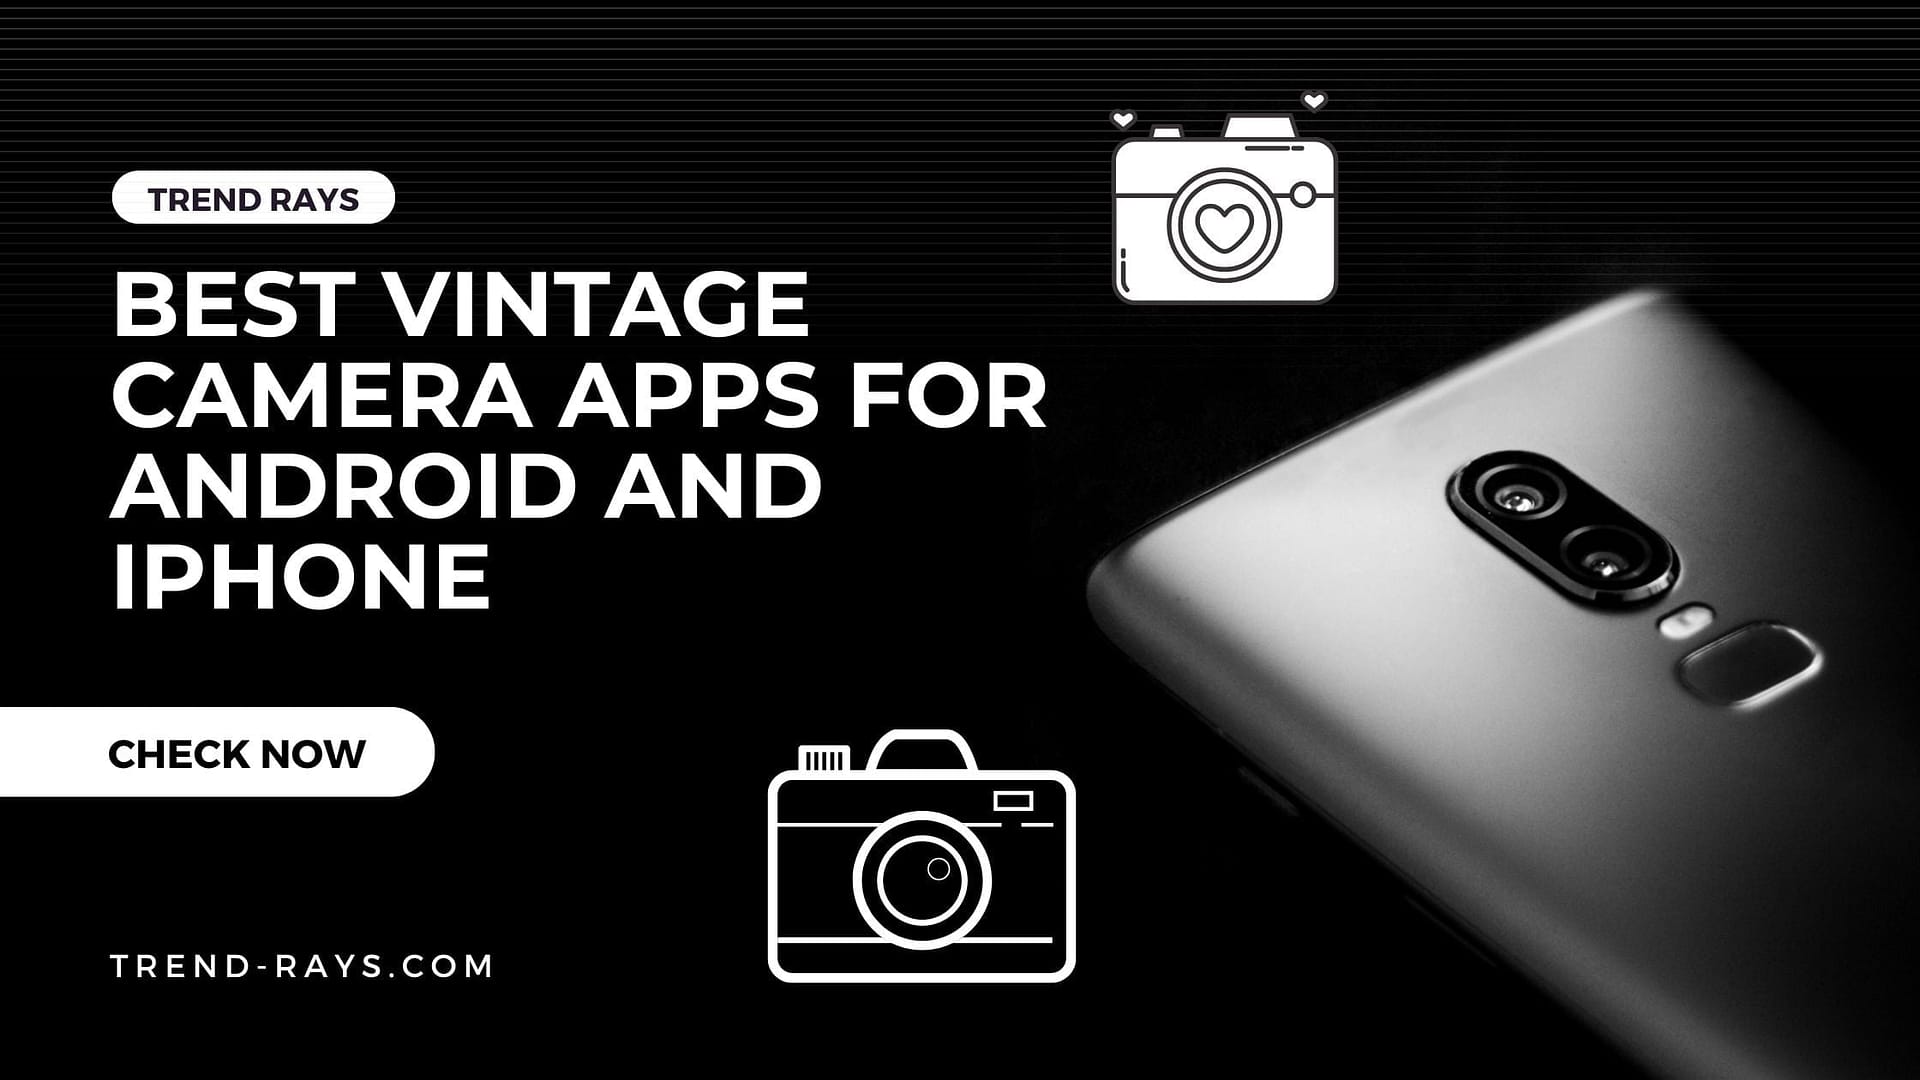 Best vintage camera apps for android and iphone